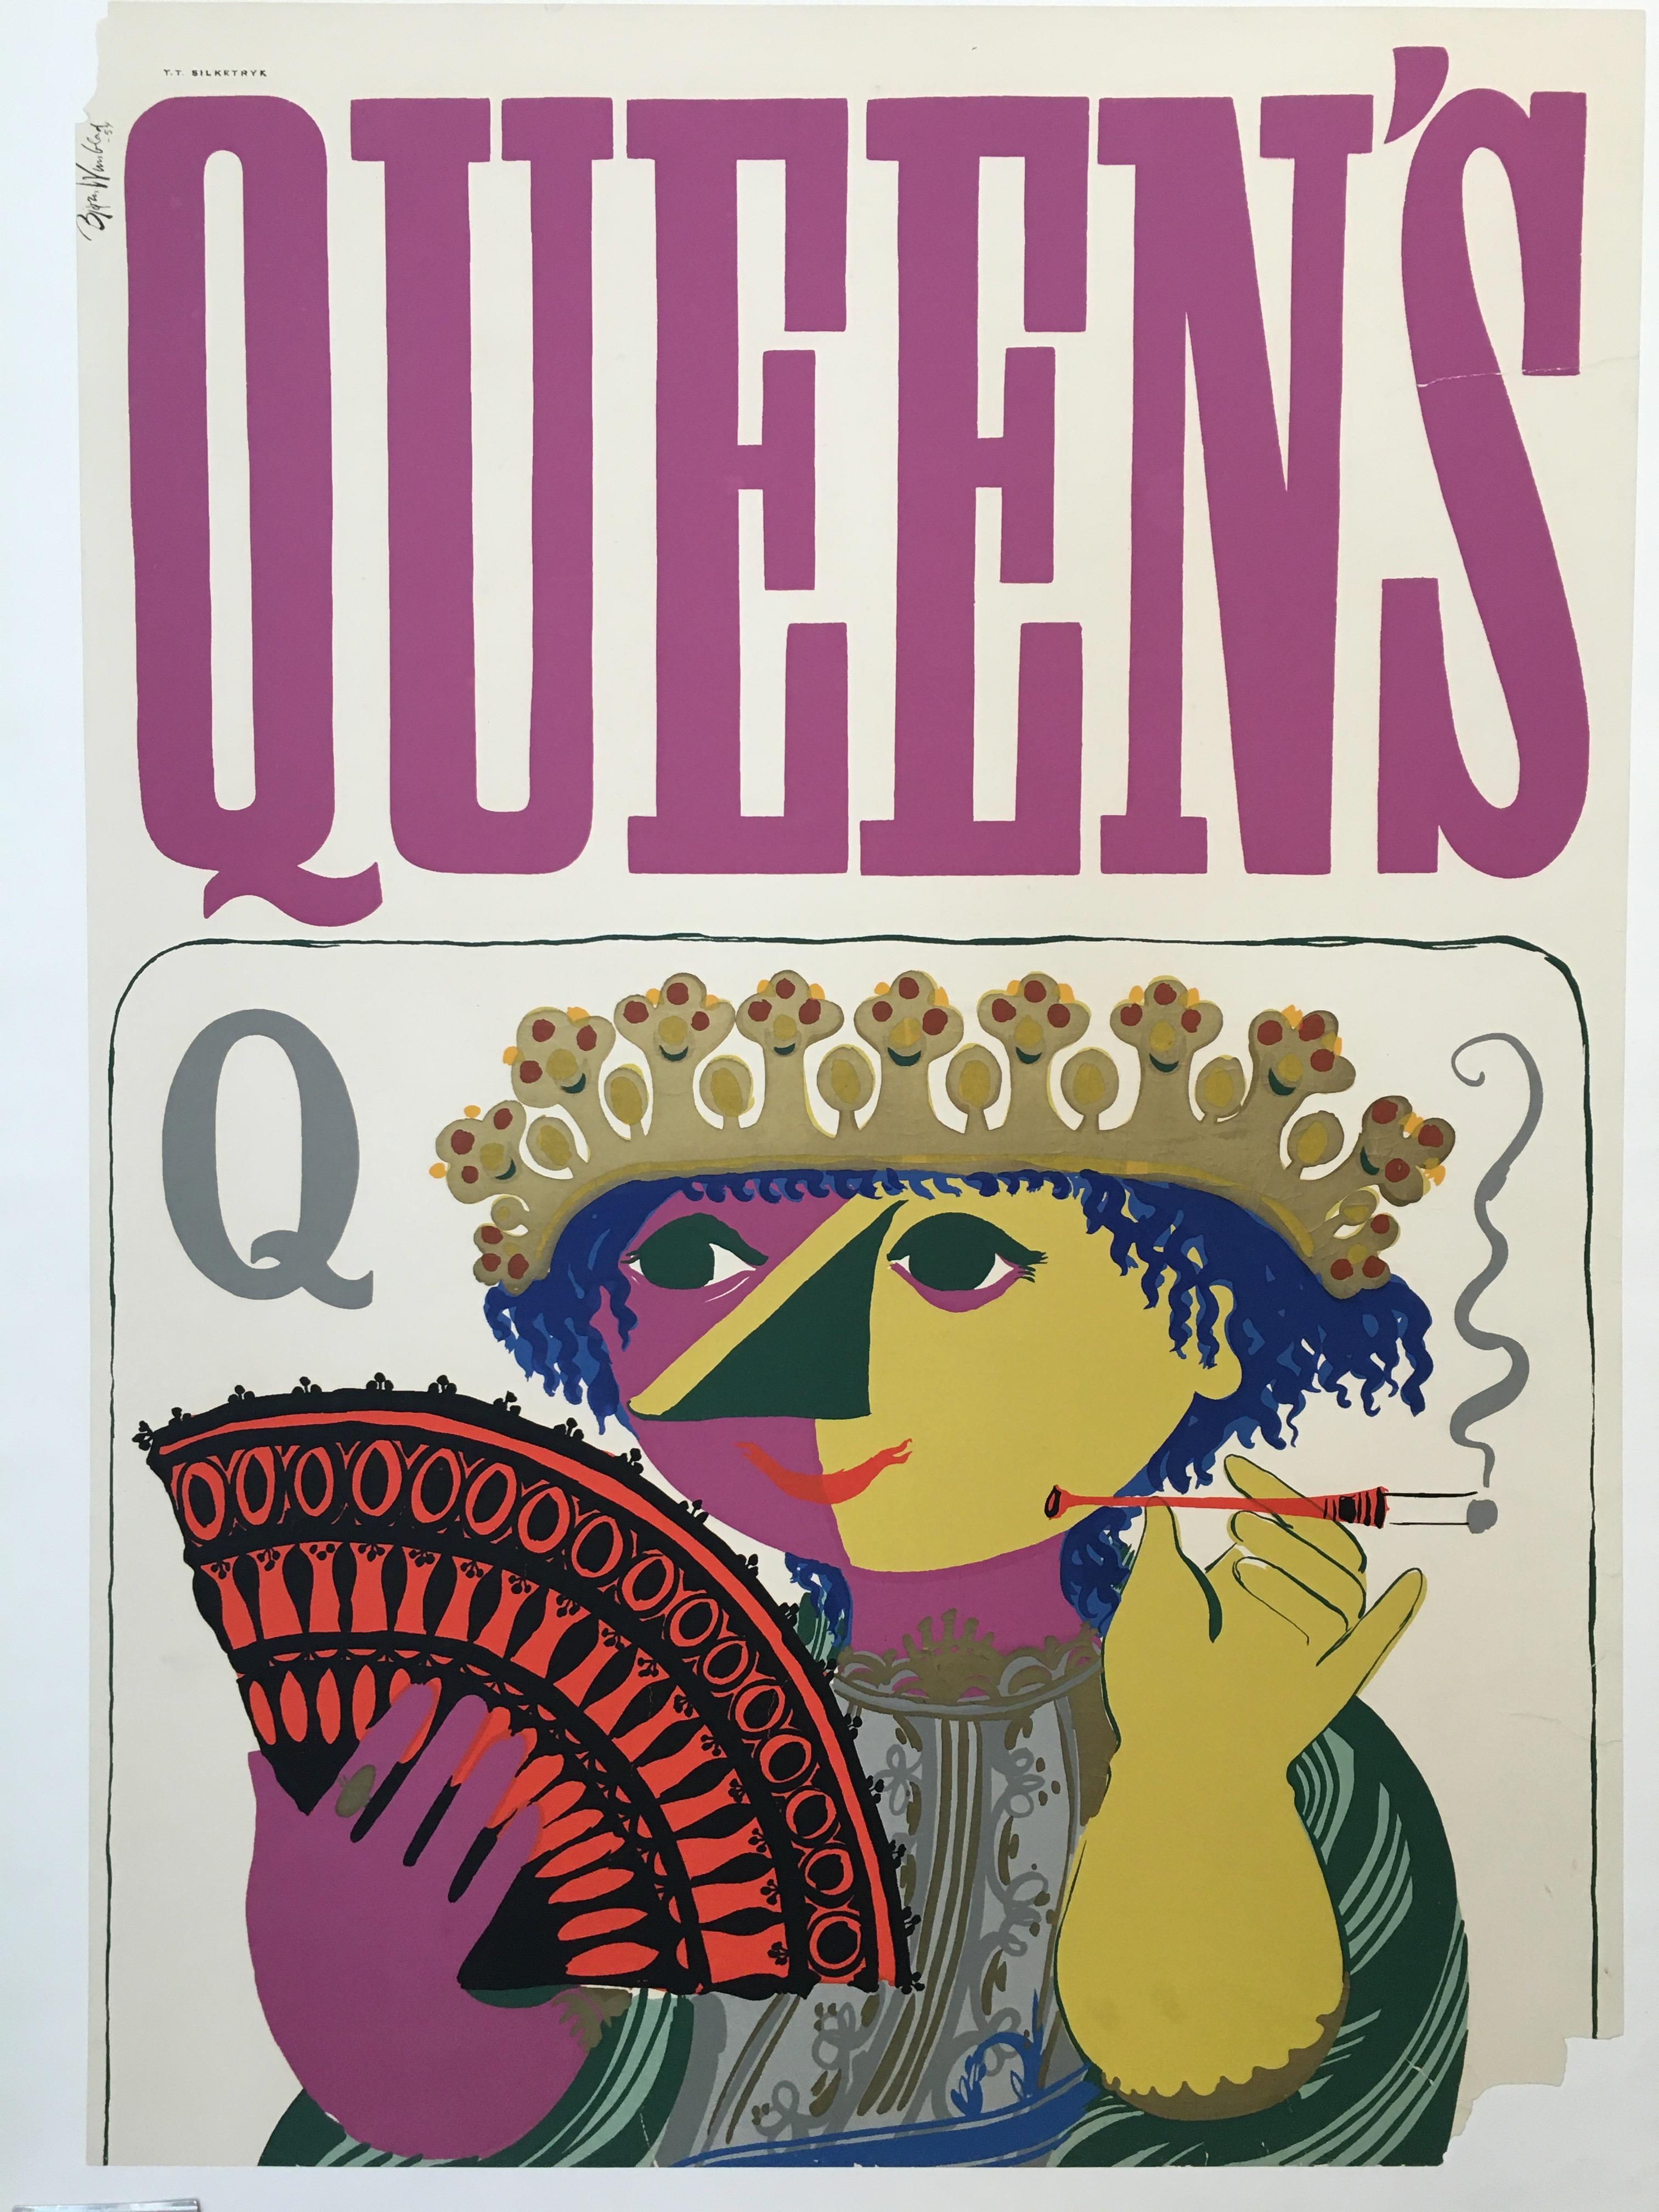 Queen's by Björn Wünblad original vintage poster, 1954

Bjørn Wiinblad, was a Danish painter, designer and artist in ceramics, silver, bronze, textiles, and graphics. His work has been shown widely in Europe, in the US and in Japan, Australia and